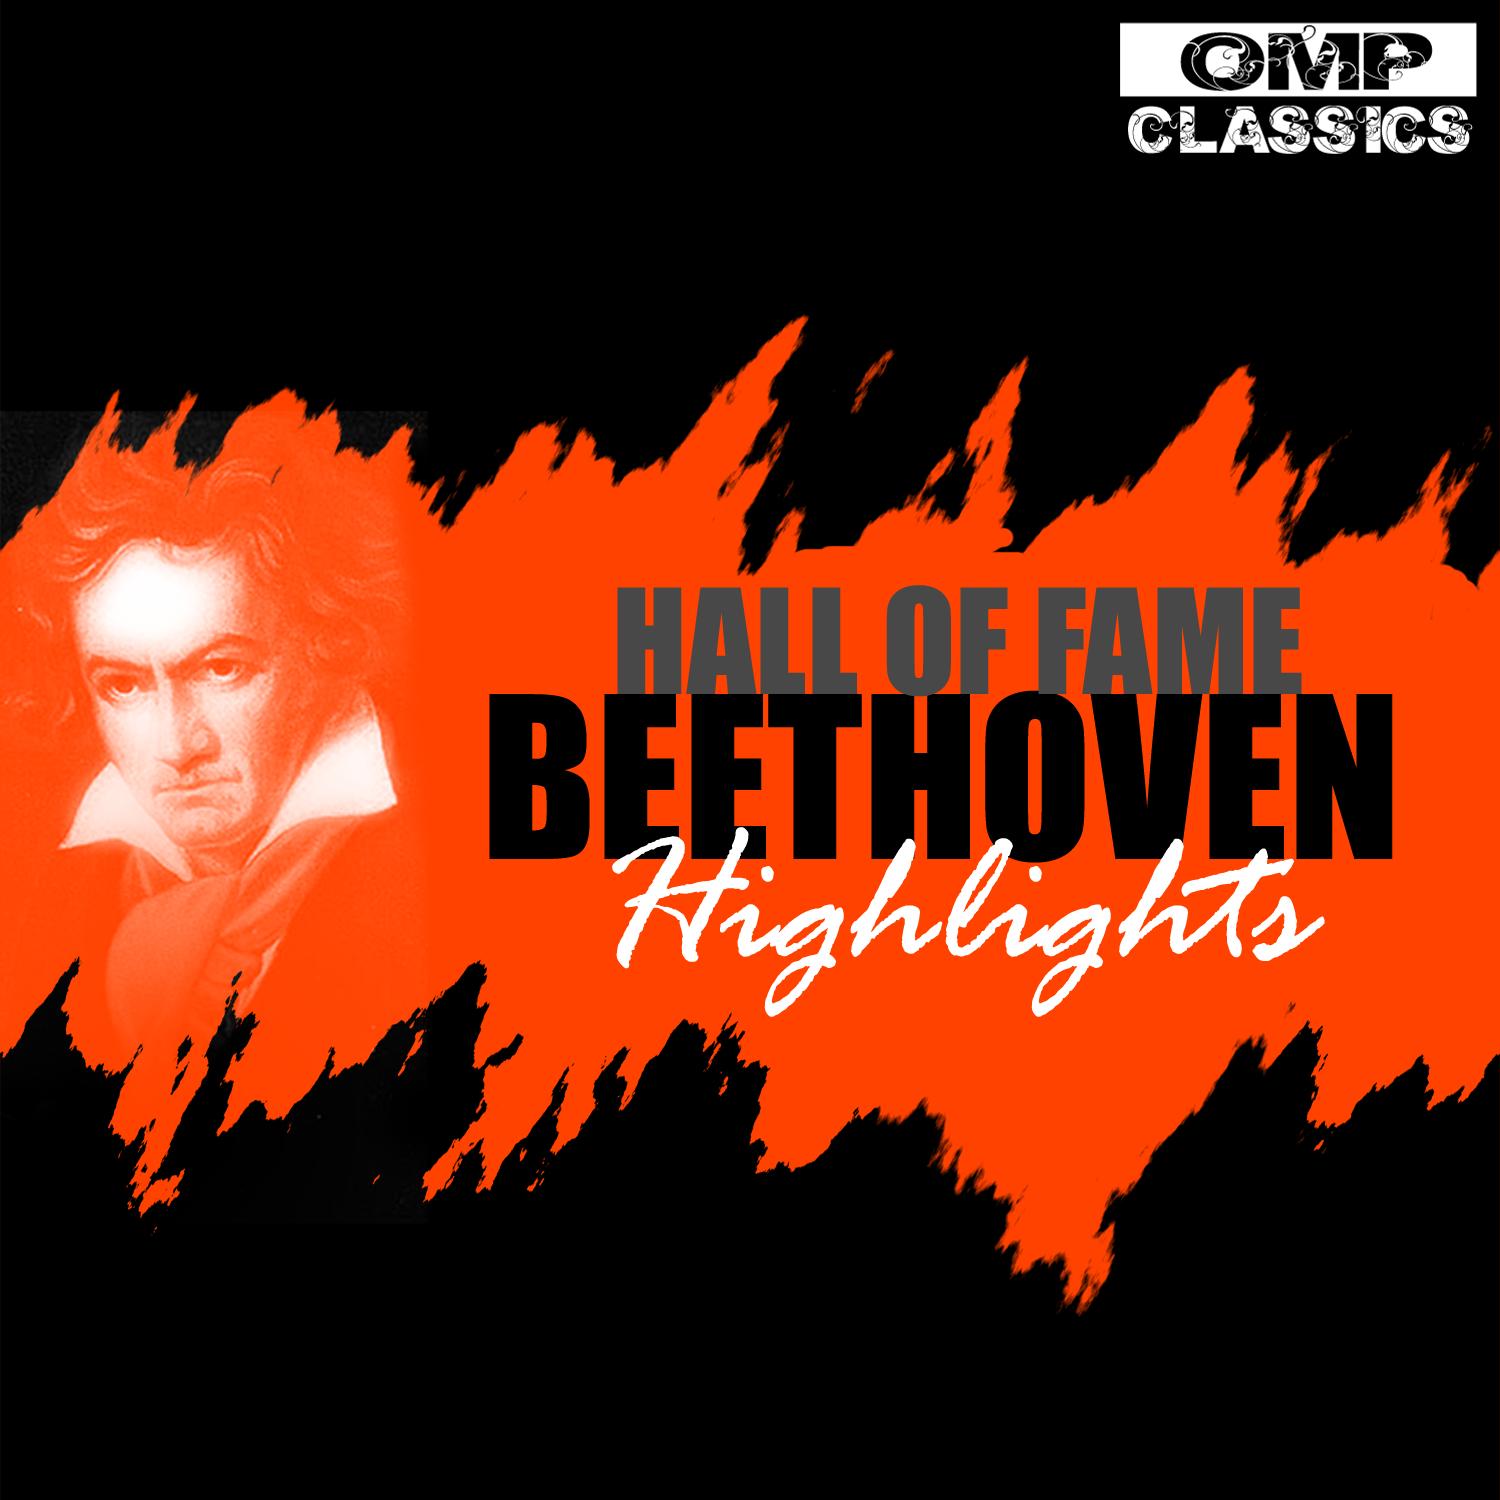 Hall of Fame: Beethoven Highlights